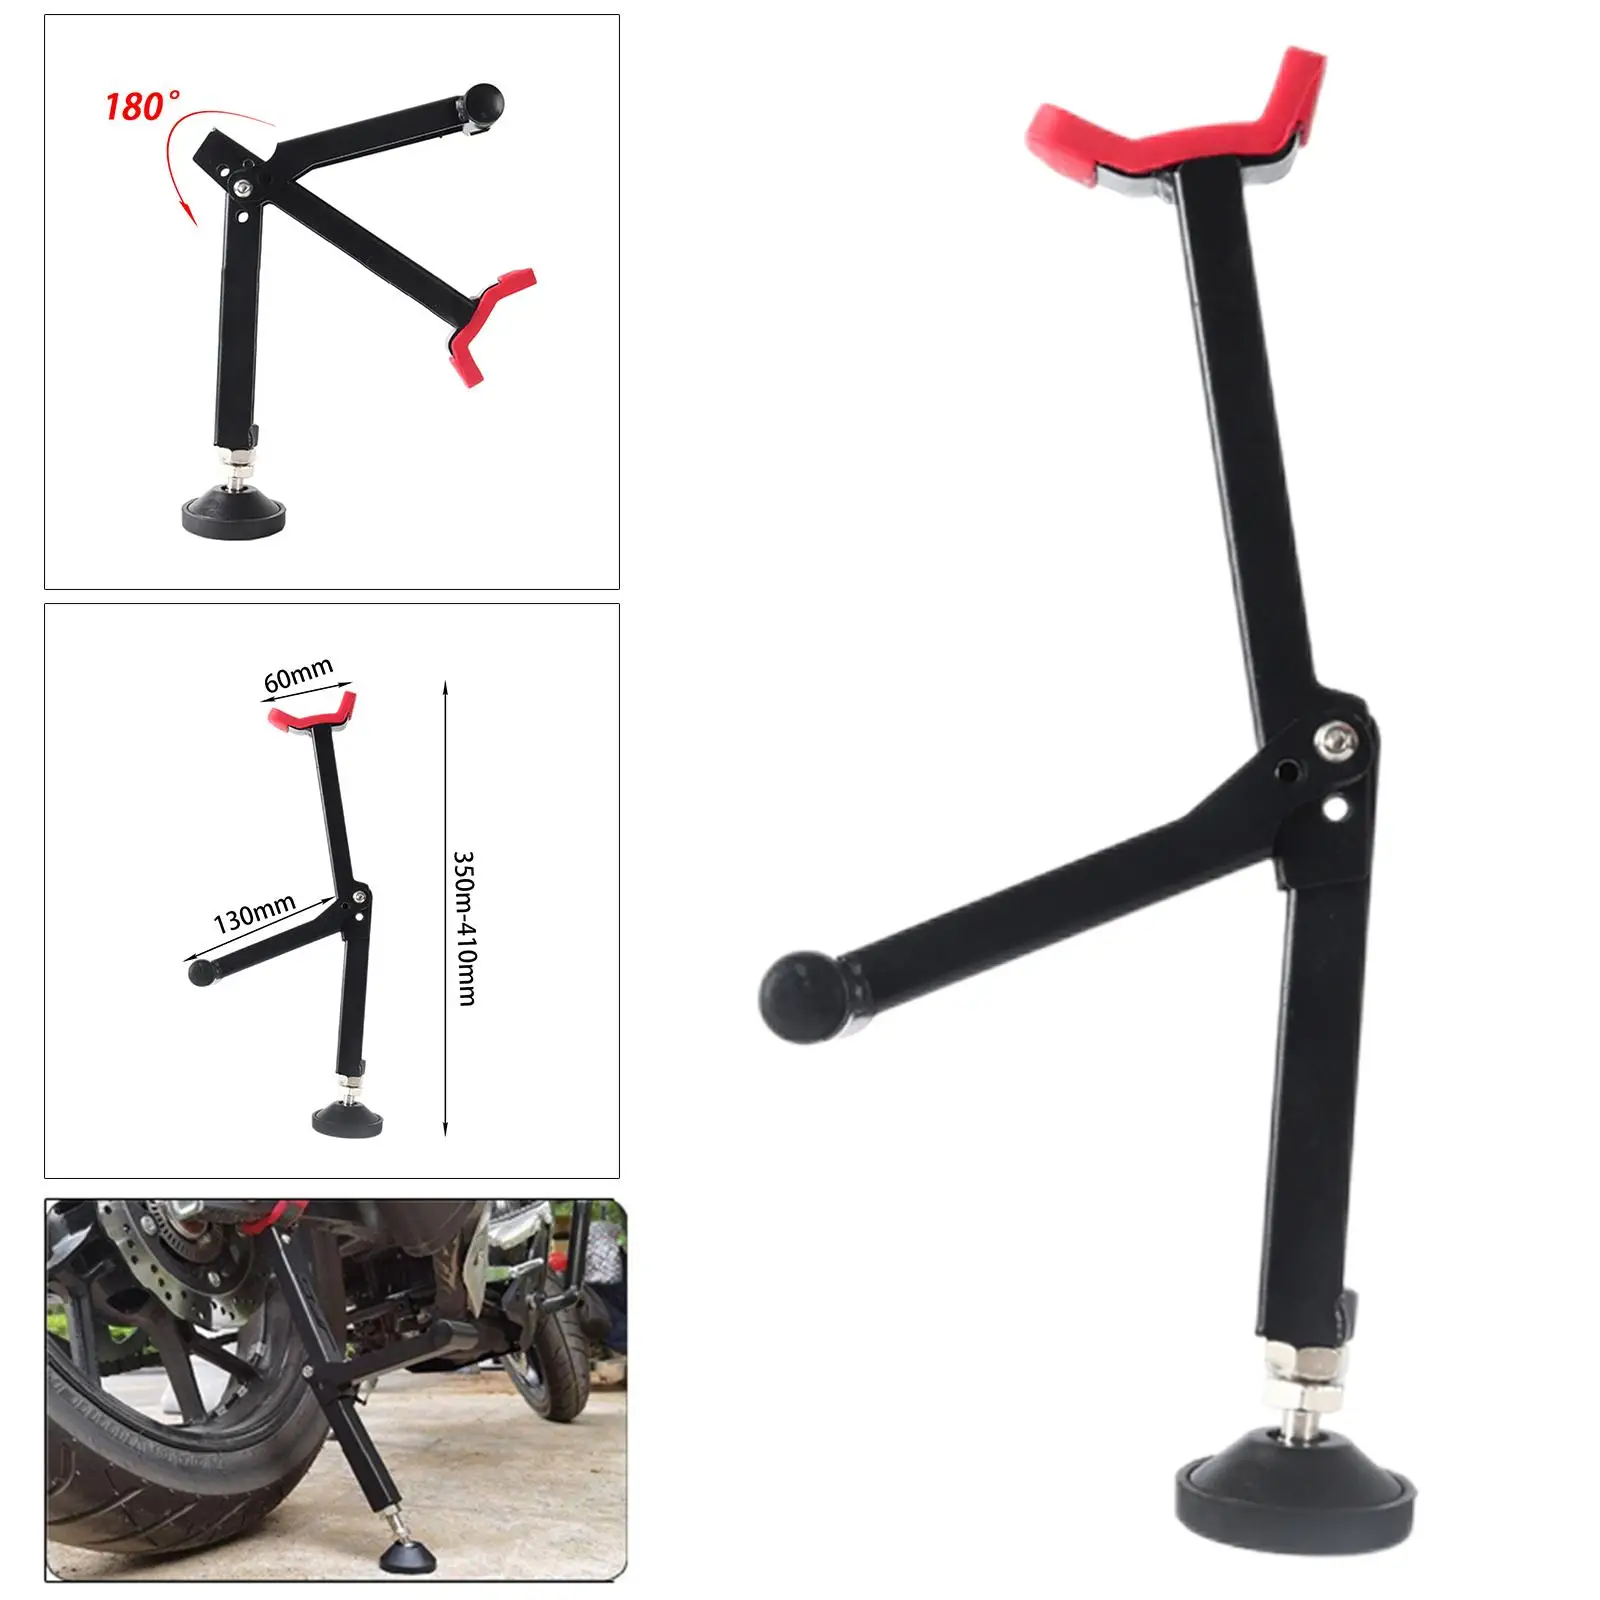 Motorbike Wheel Support Side Stand Expandable Accs Fit for Bike Repairing